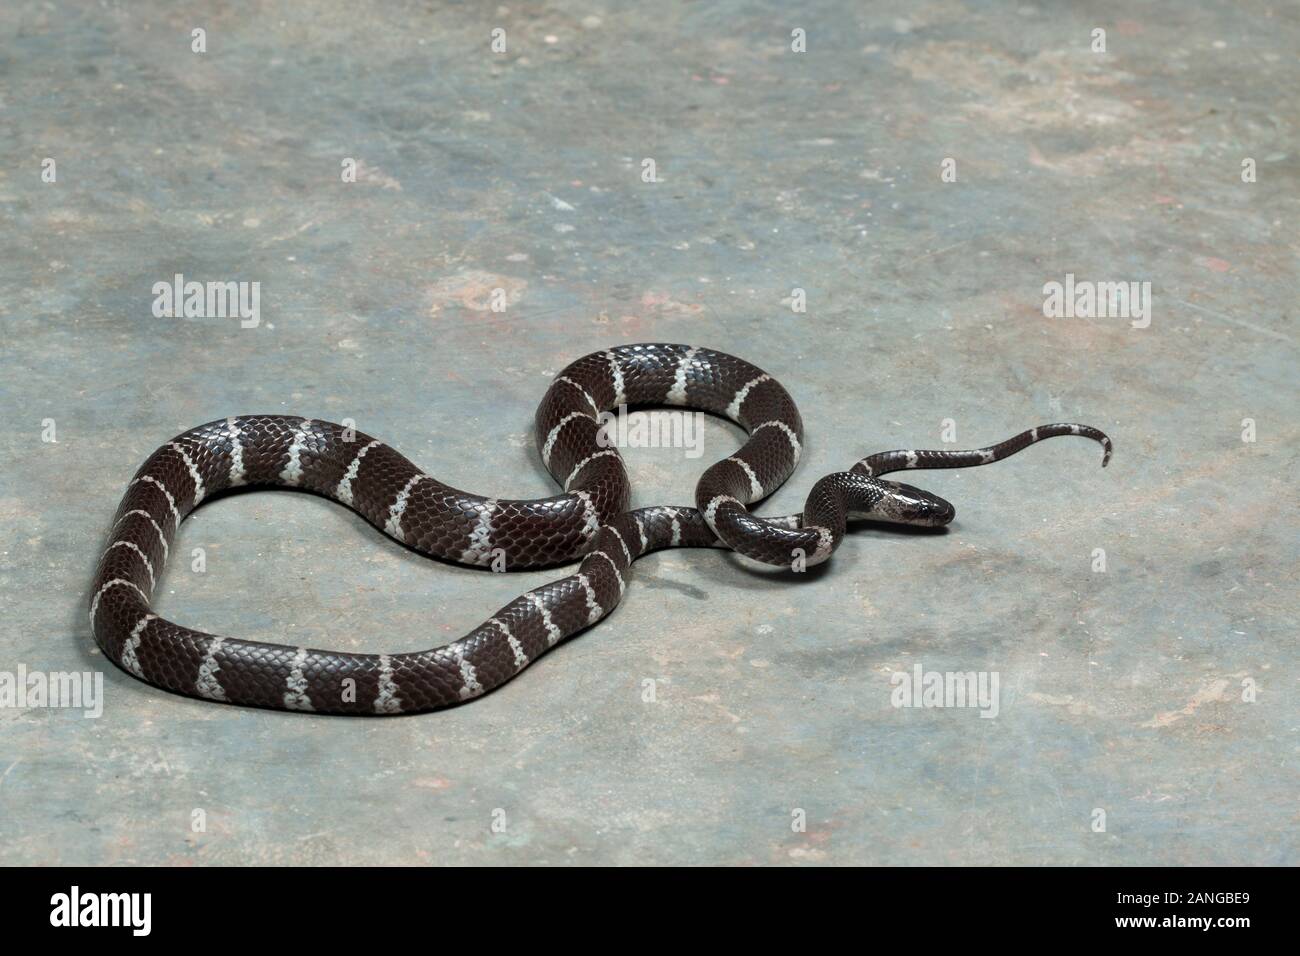 The White-banded wolf snake, Lycodon septentrionalis, also known as the Northern large-toothed snake found in Asia Stock Photo